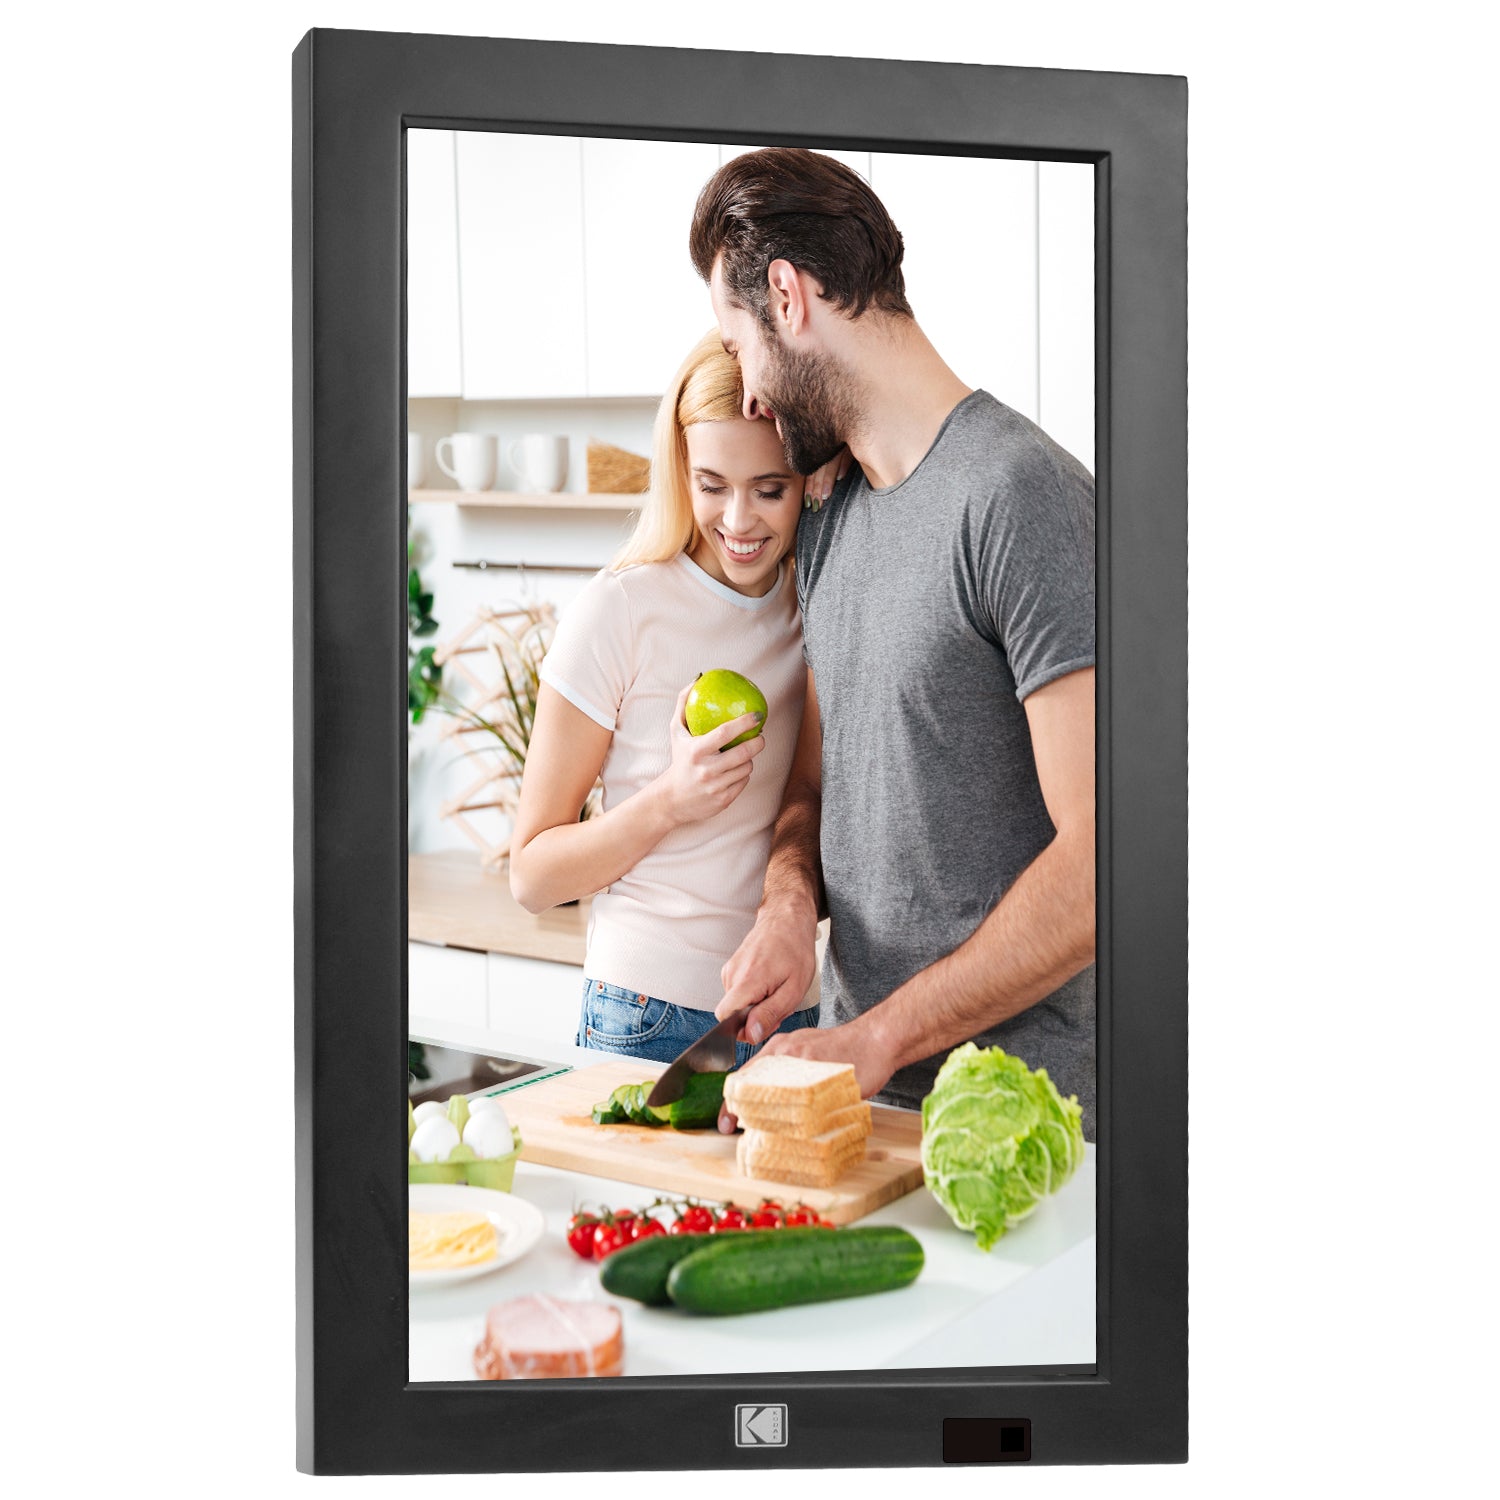 Kodak 17-inch Wi-Fi Enabled Wall Photo Frame WF173, in Burlywood or Black with Motion Sensor, Photo, Video, Clock and 16GB Internal Memory